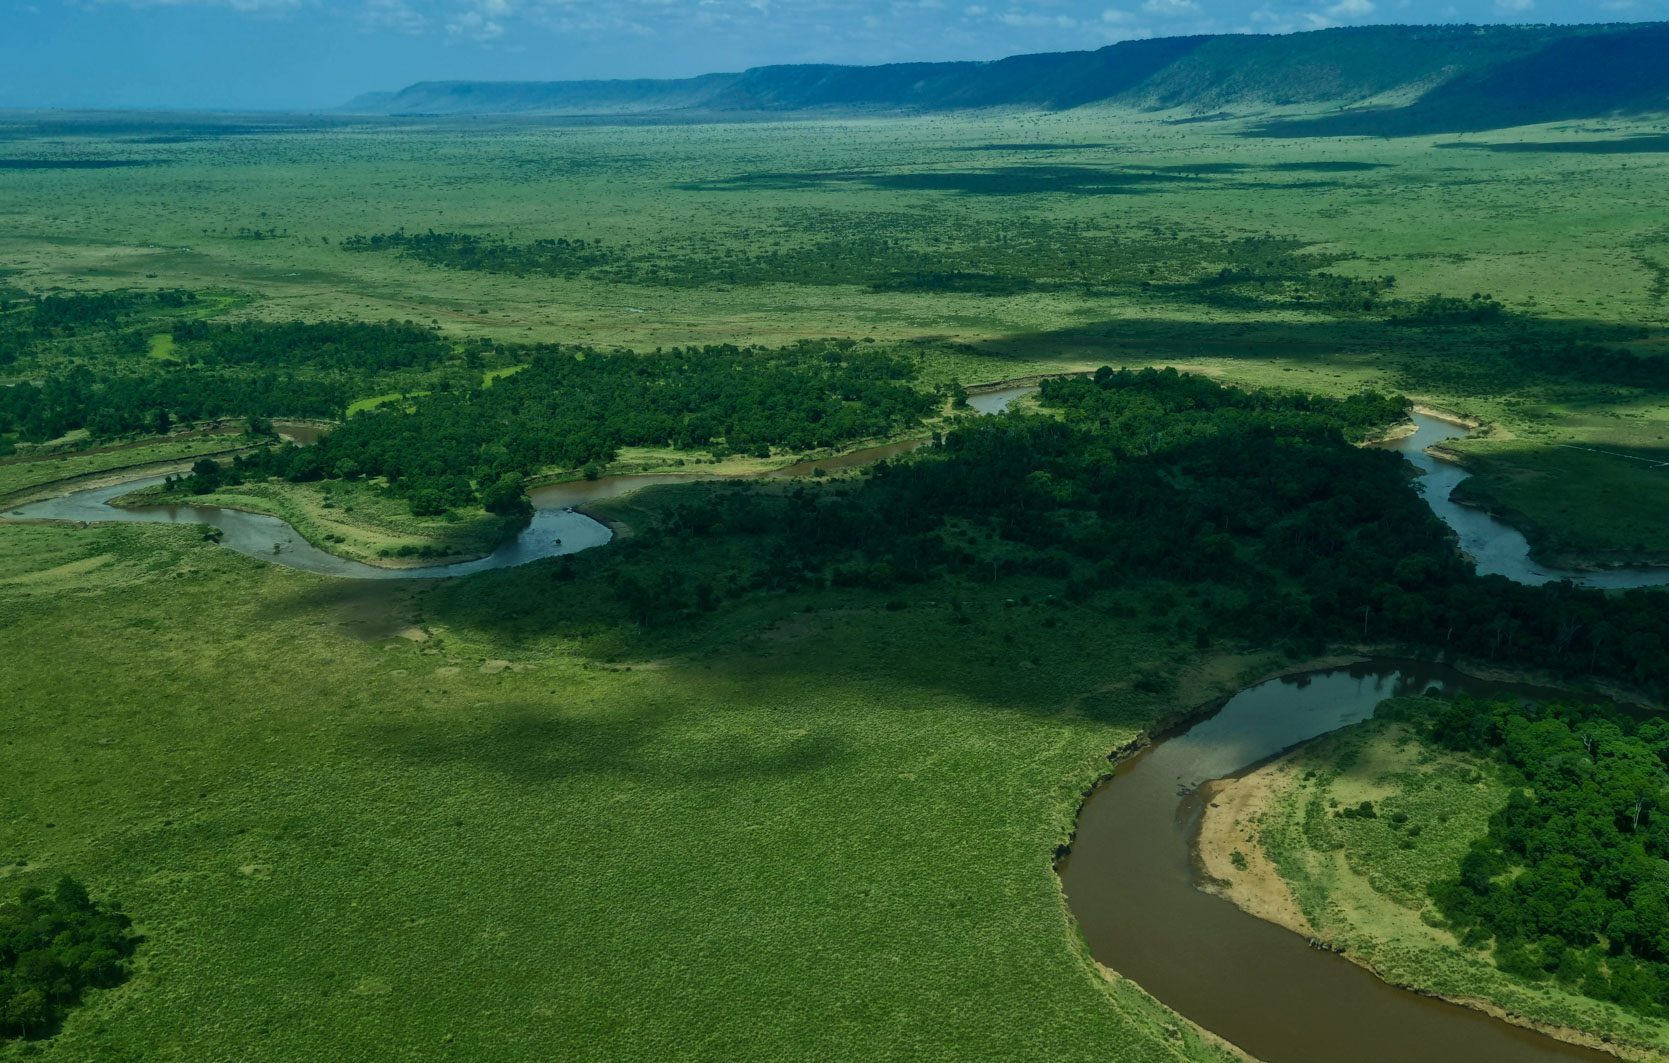 Flying in over the Mara River